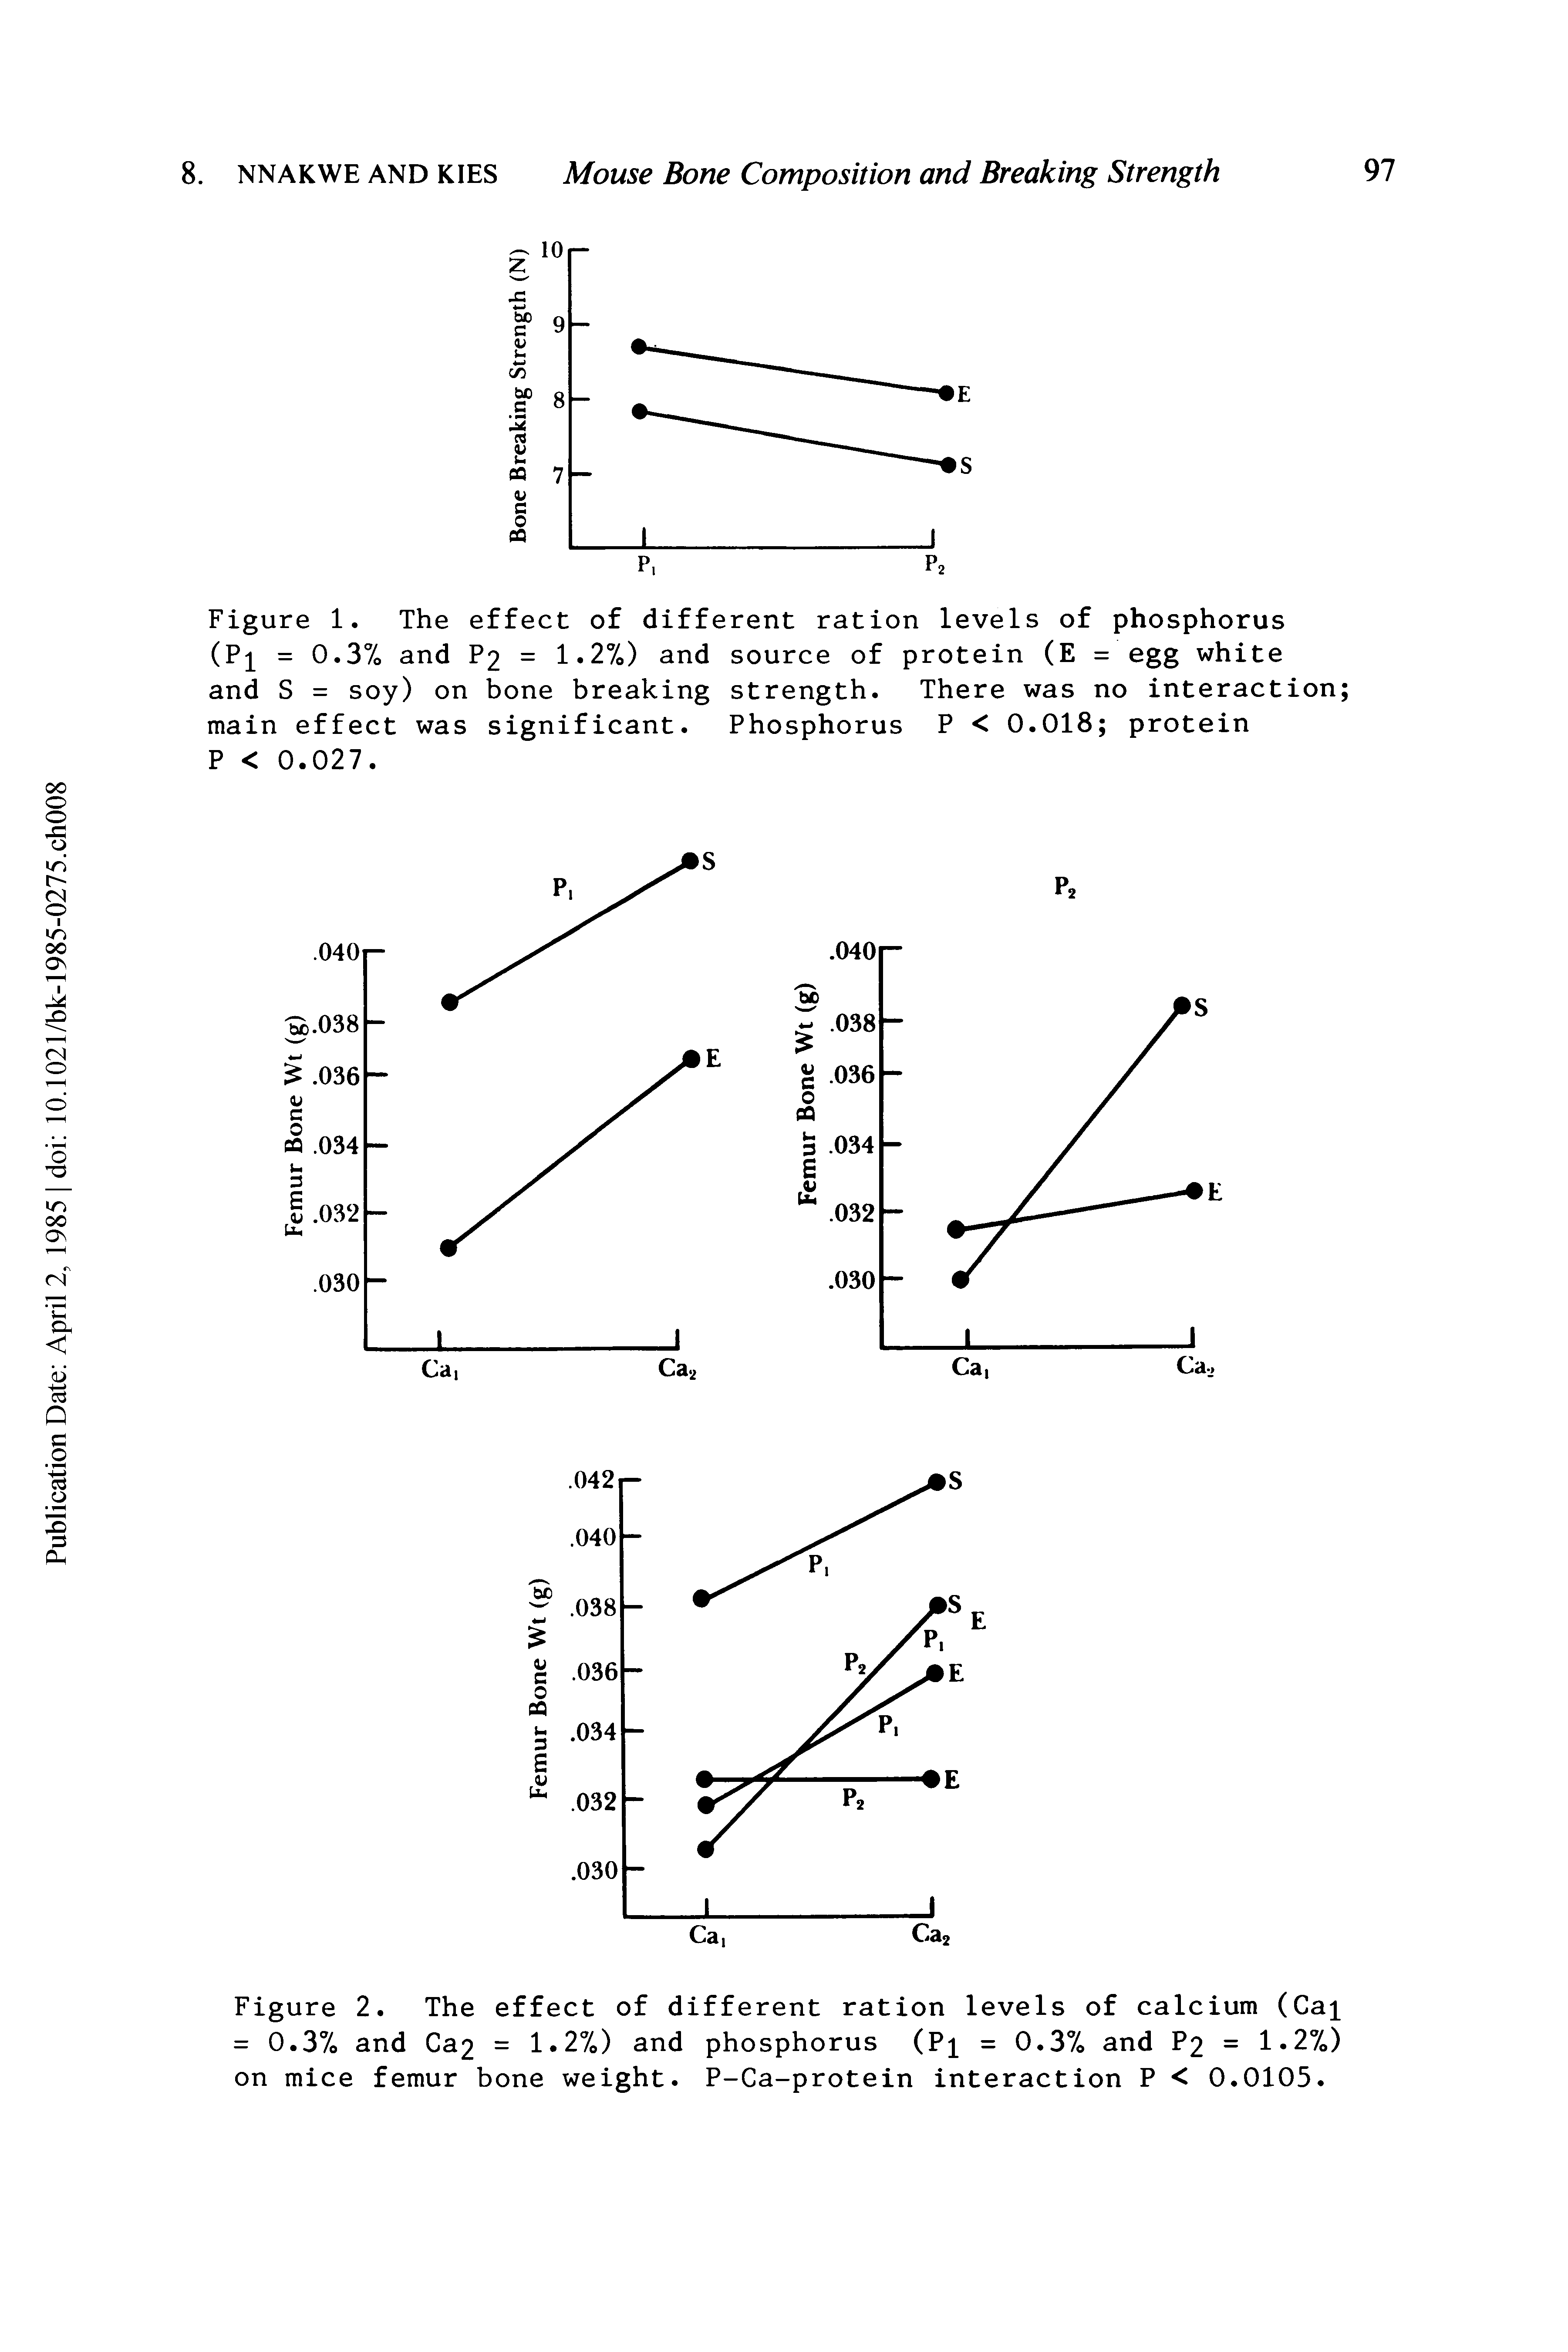 Figure 1. The effect of different ration levels of phosphorus (Pi = 0.3% and P2 = 1.2%) and source of protein (E = egg white and S = soy) on bone breaking strength. There was no interaction main effect was significant. Phosphorus P < 0.018 protein P < 0.027.